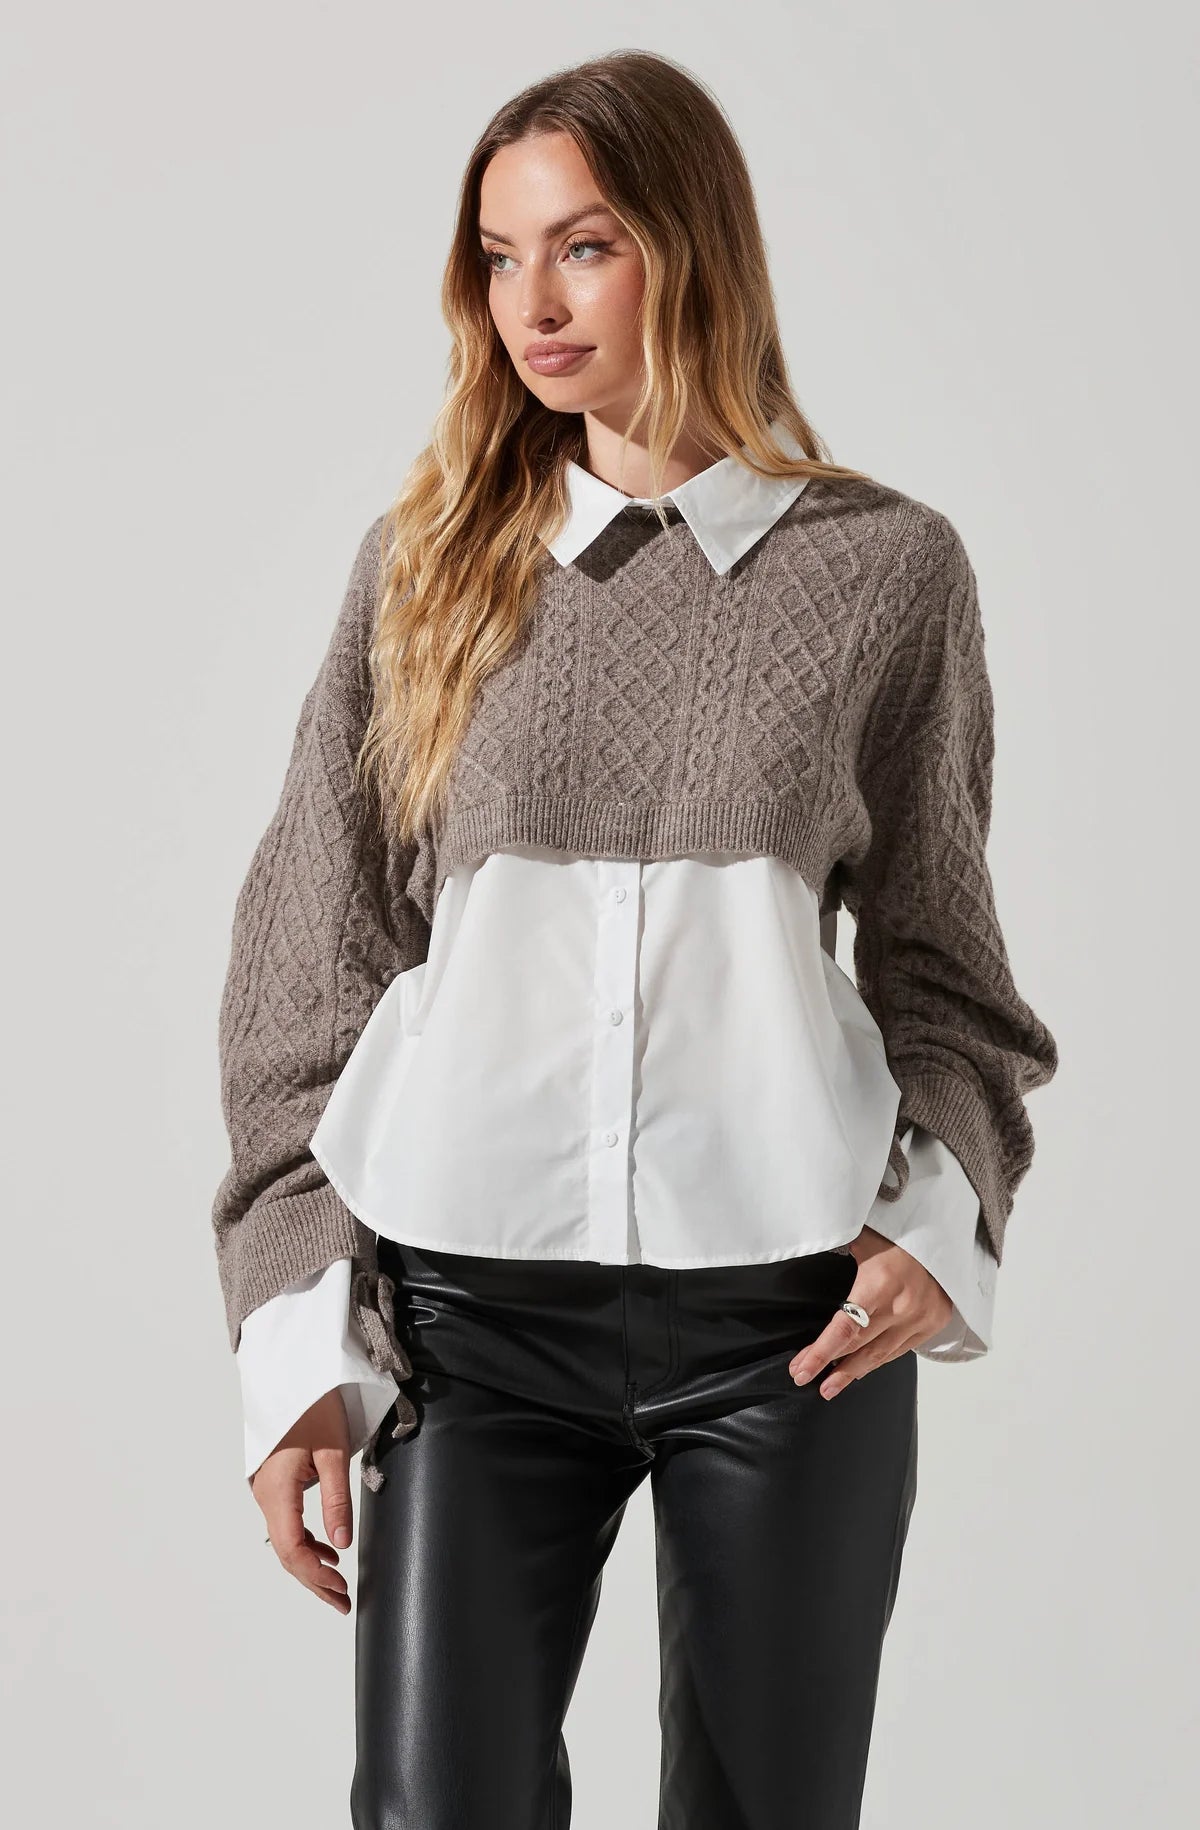 A woman wearing a mixed media top. It is a brown taupe sweater with a white button down underneath that comes as one piece. Classic collared shirt. She paired it with a faux leather high waisted pant.